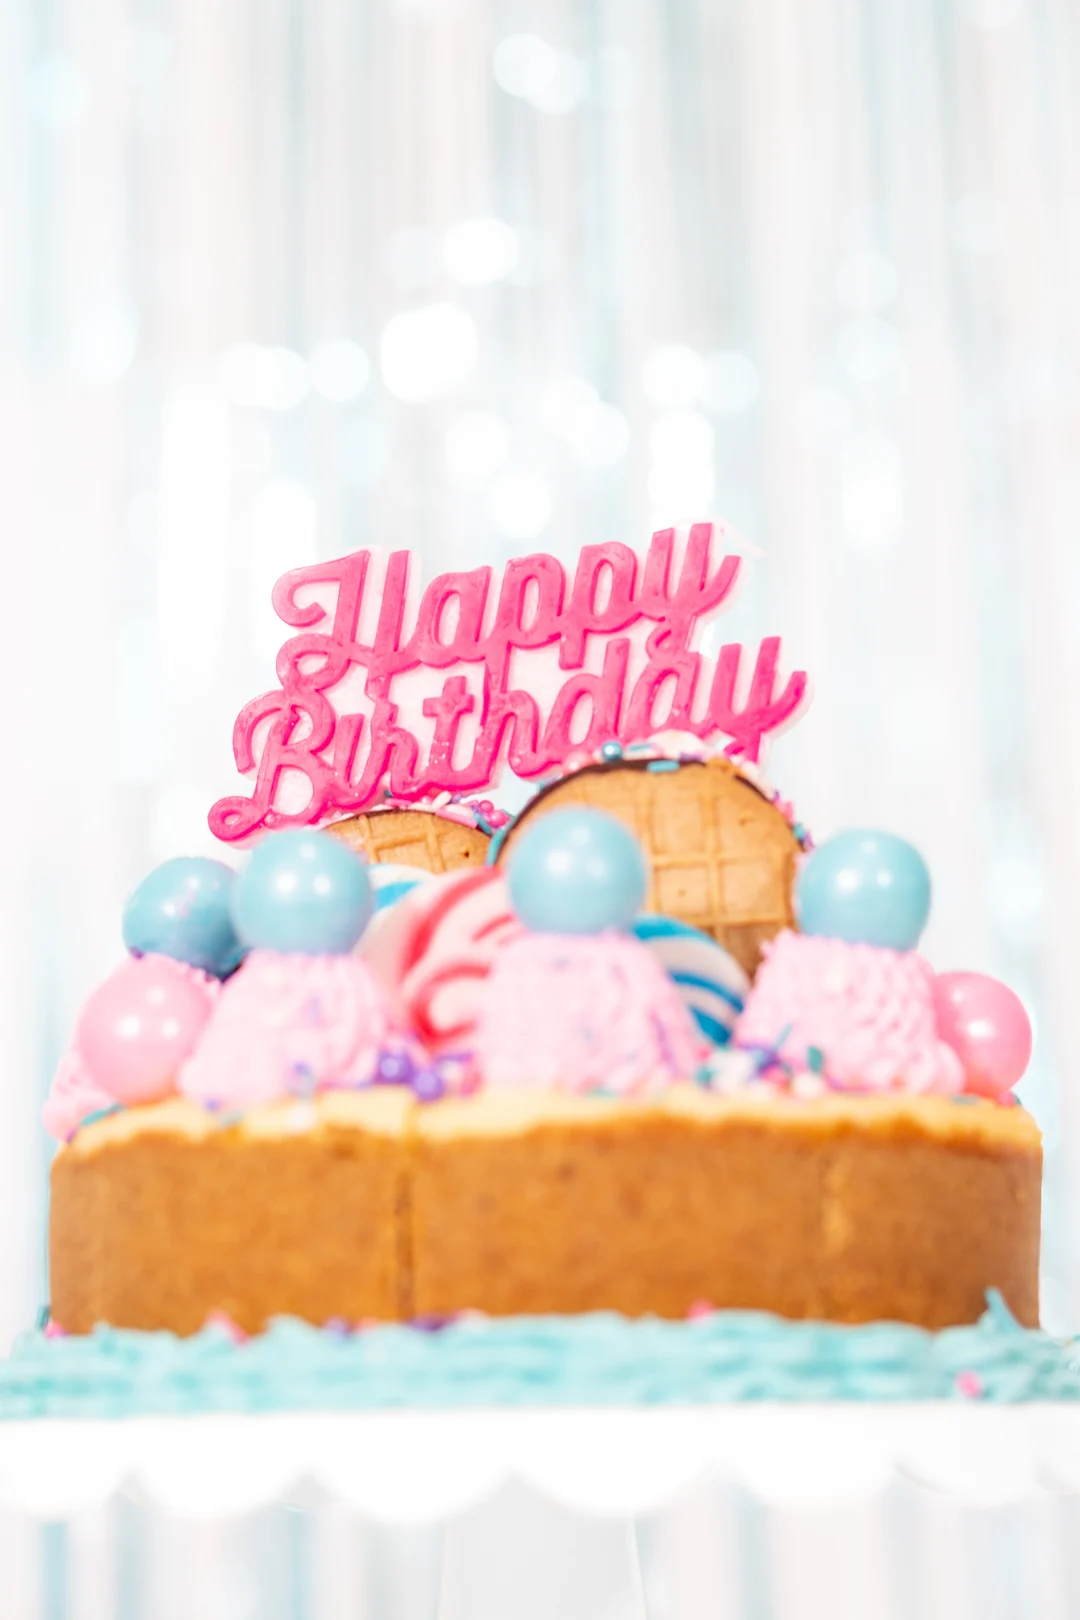 pretty birthday cheesecake with pink and blue cake toppings from lollipops to gumballs